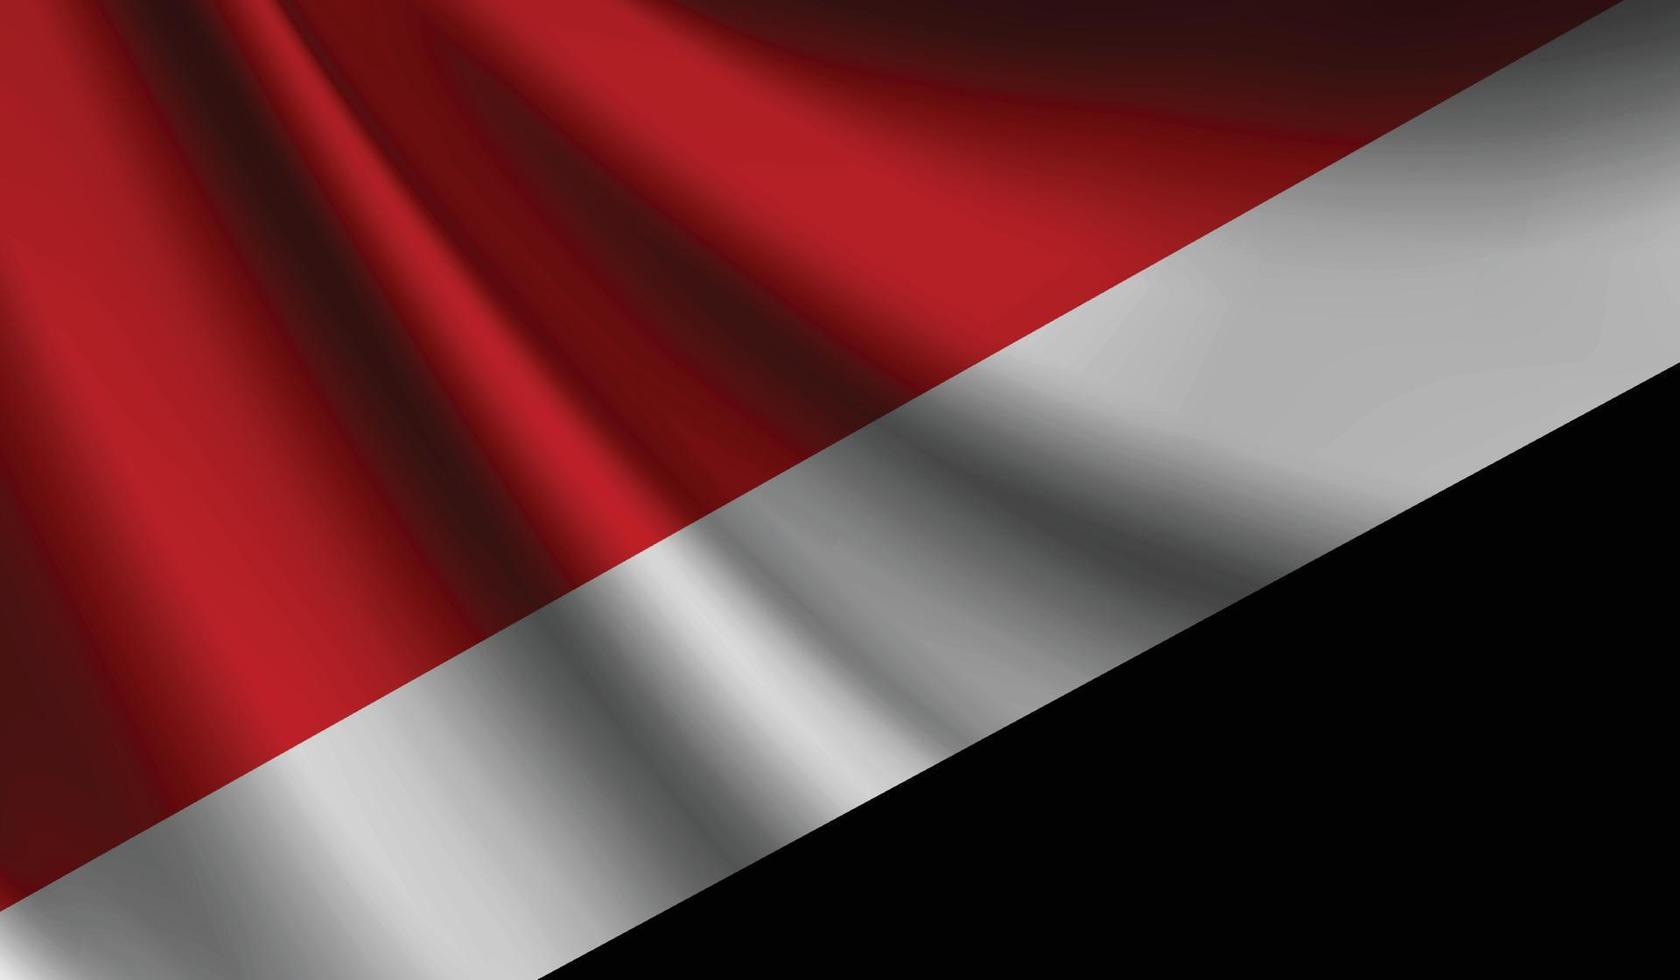 sealand Principality of Sealand flag waving Background for patriotic and national design vector